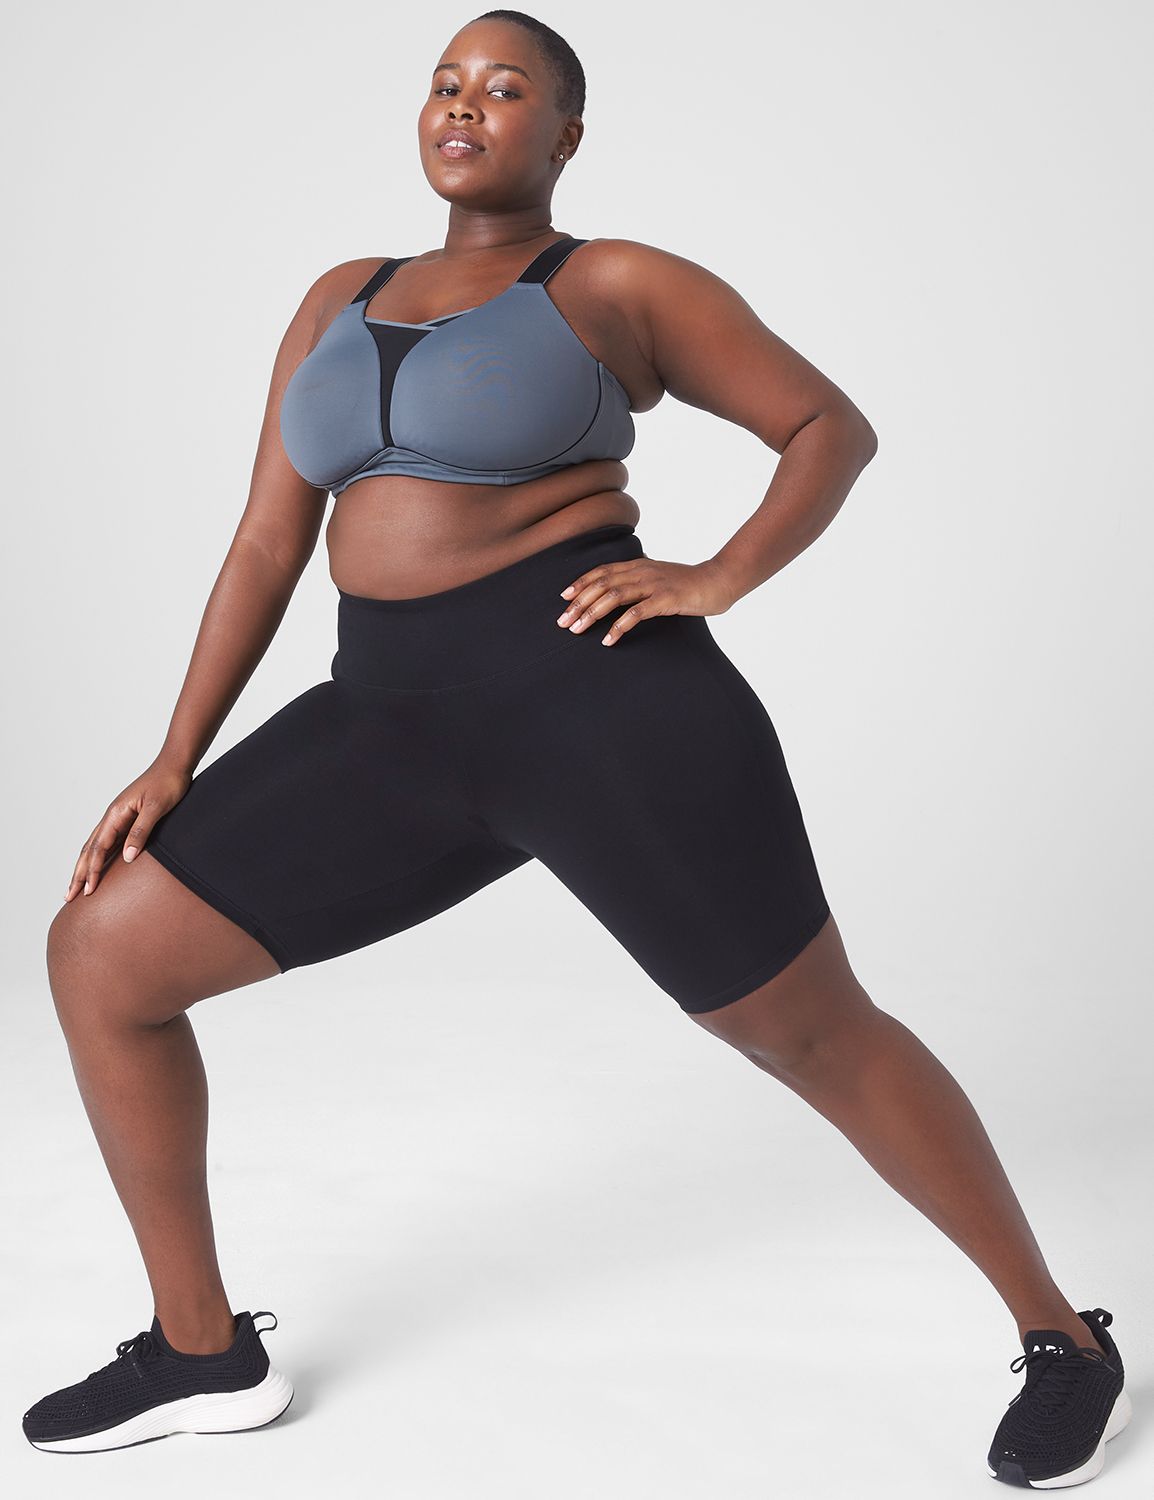 Lane Bryant - Running errands or running on the treadmill? LIVI sport bras  gotchu, no matter what you're up to today. Shop LIVI:  #LIVILIFE